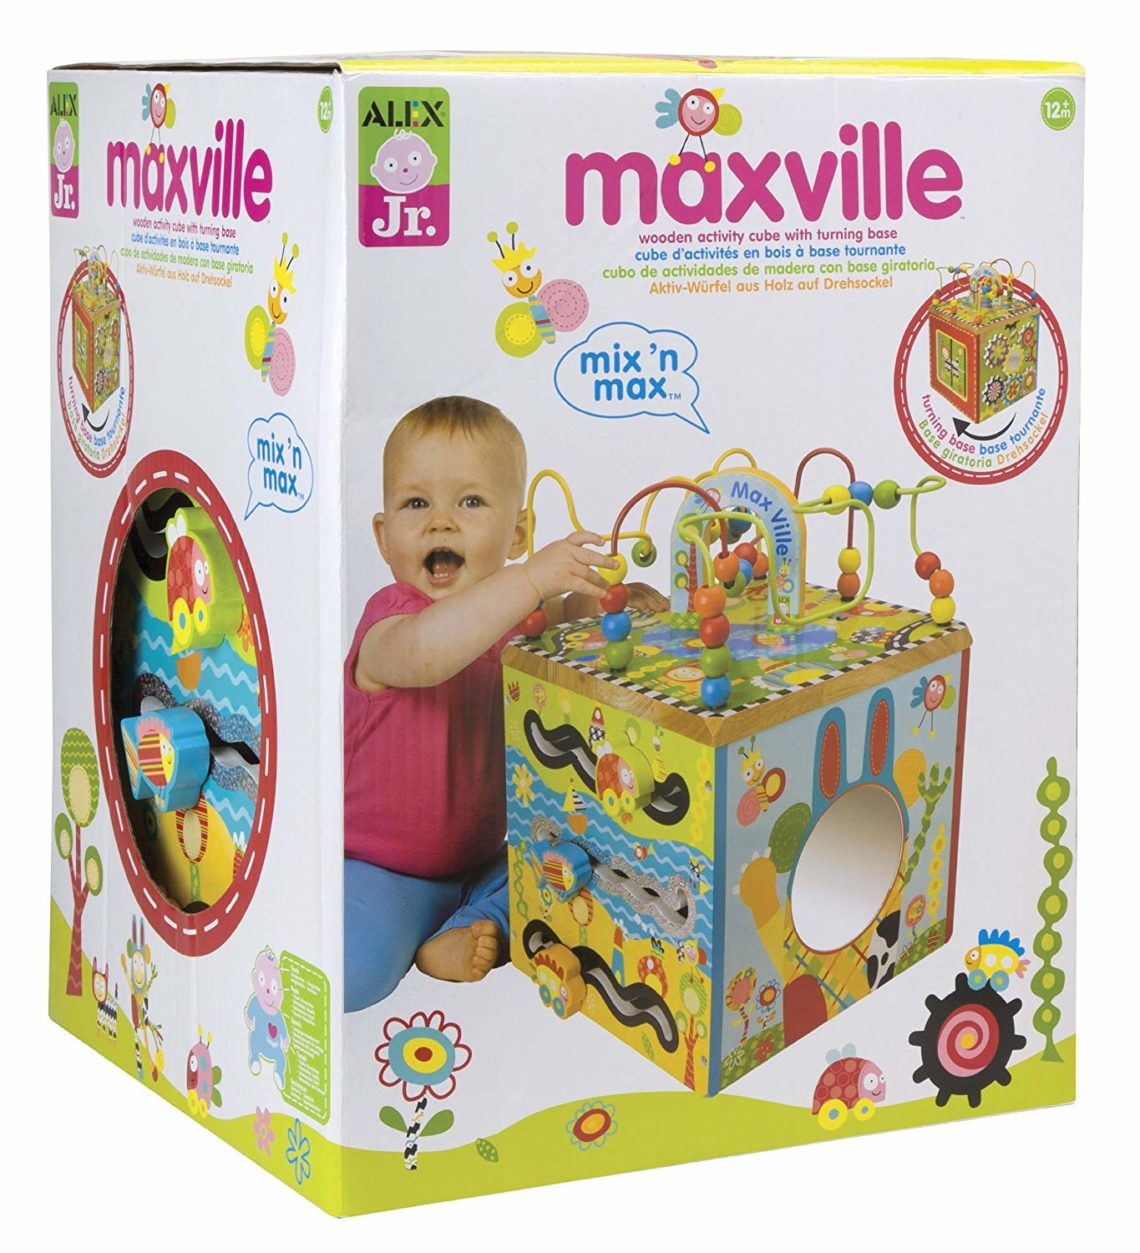 maxville wooden activity cube desgined for kids